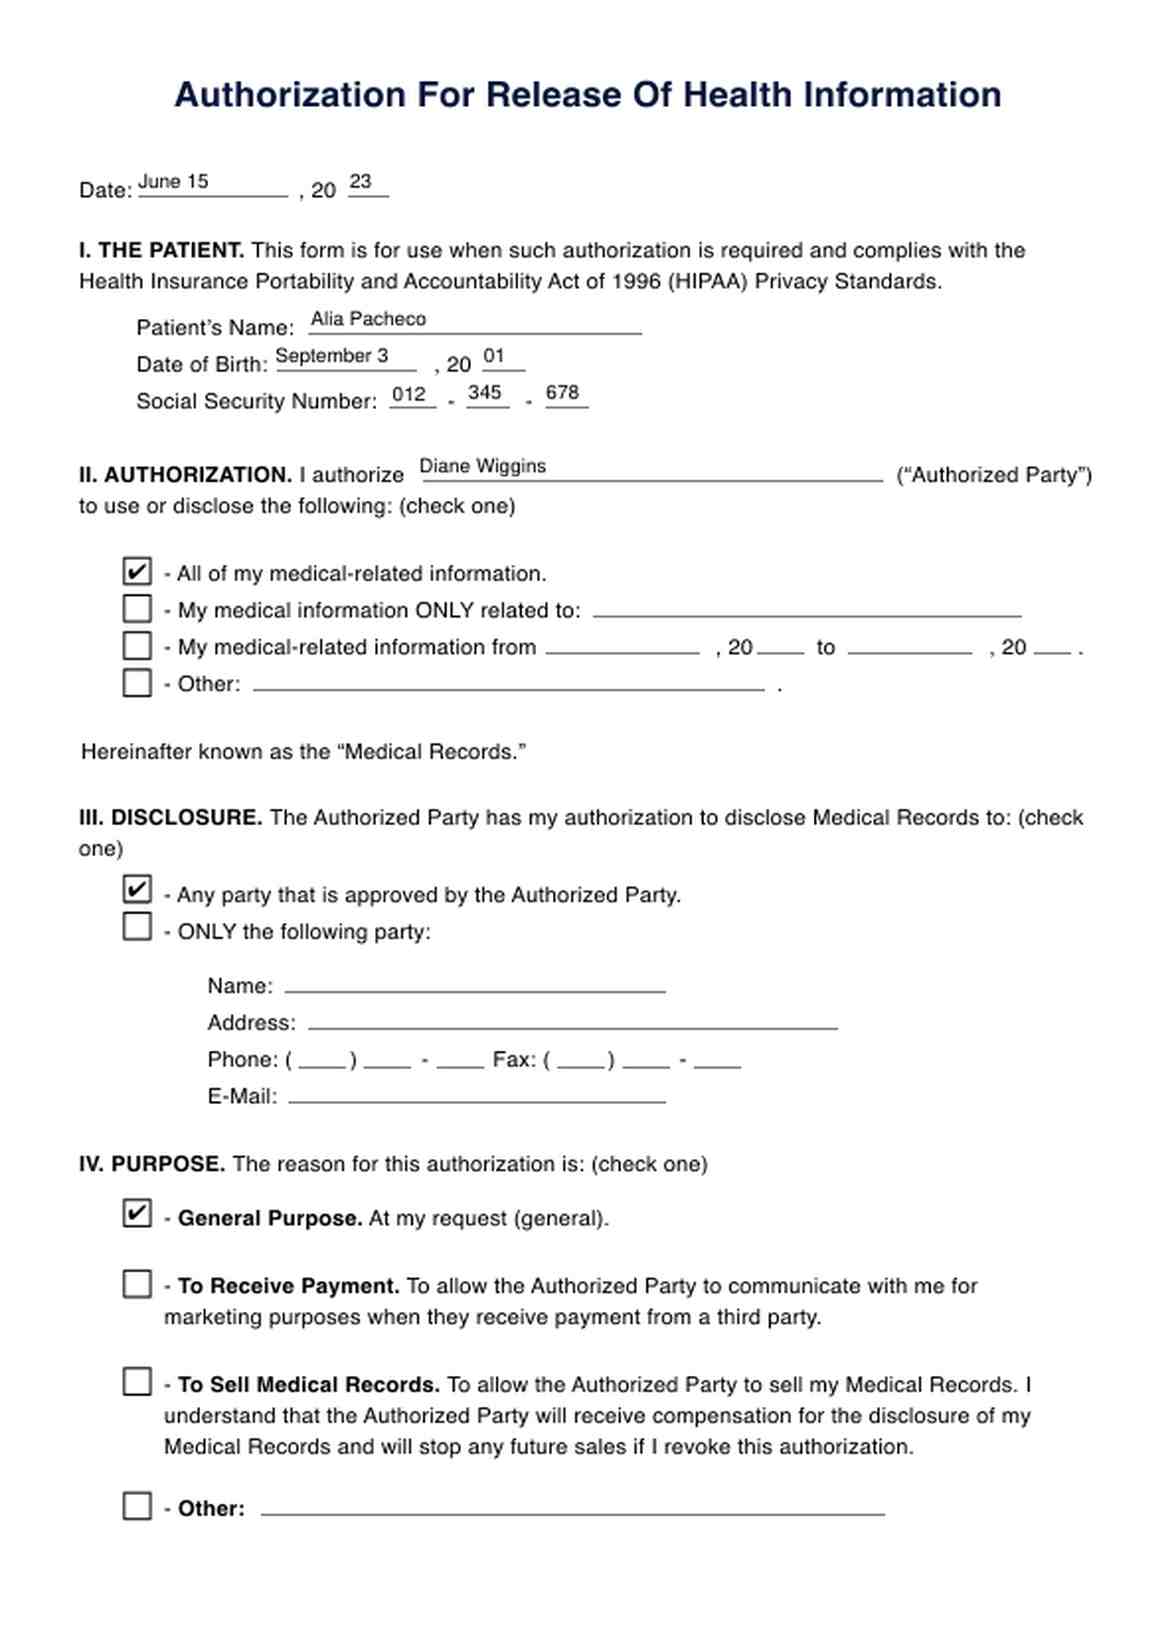 Authorization For Release Of Health Information PDF Example